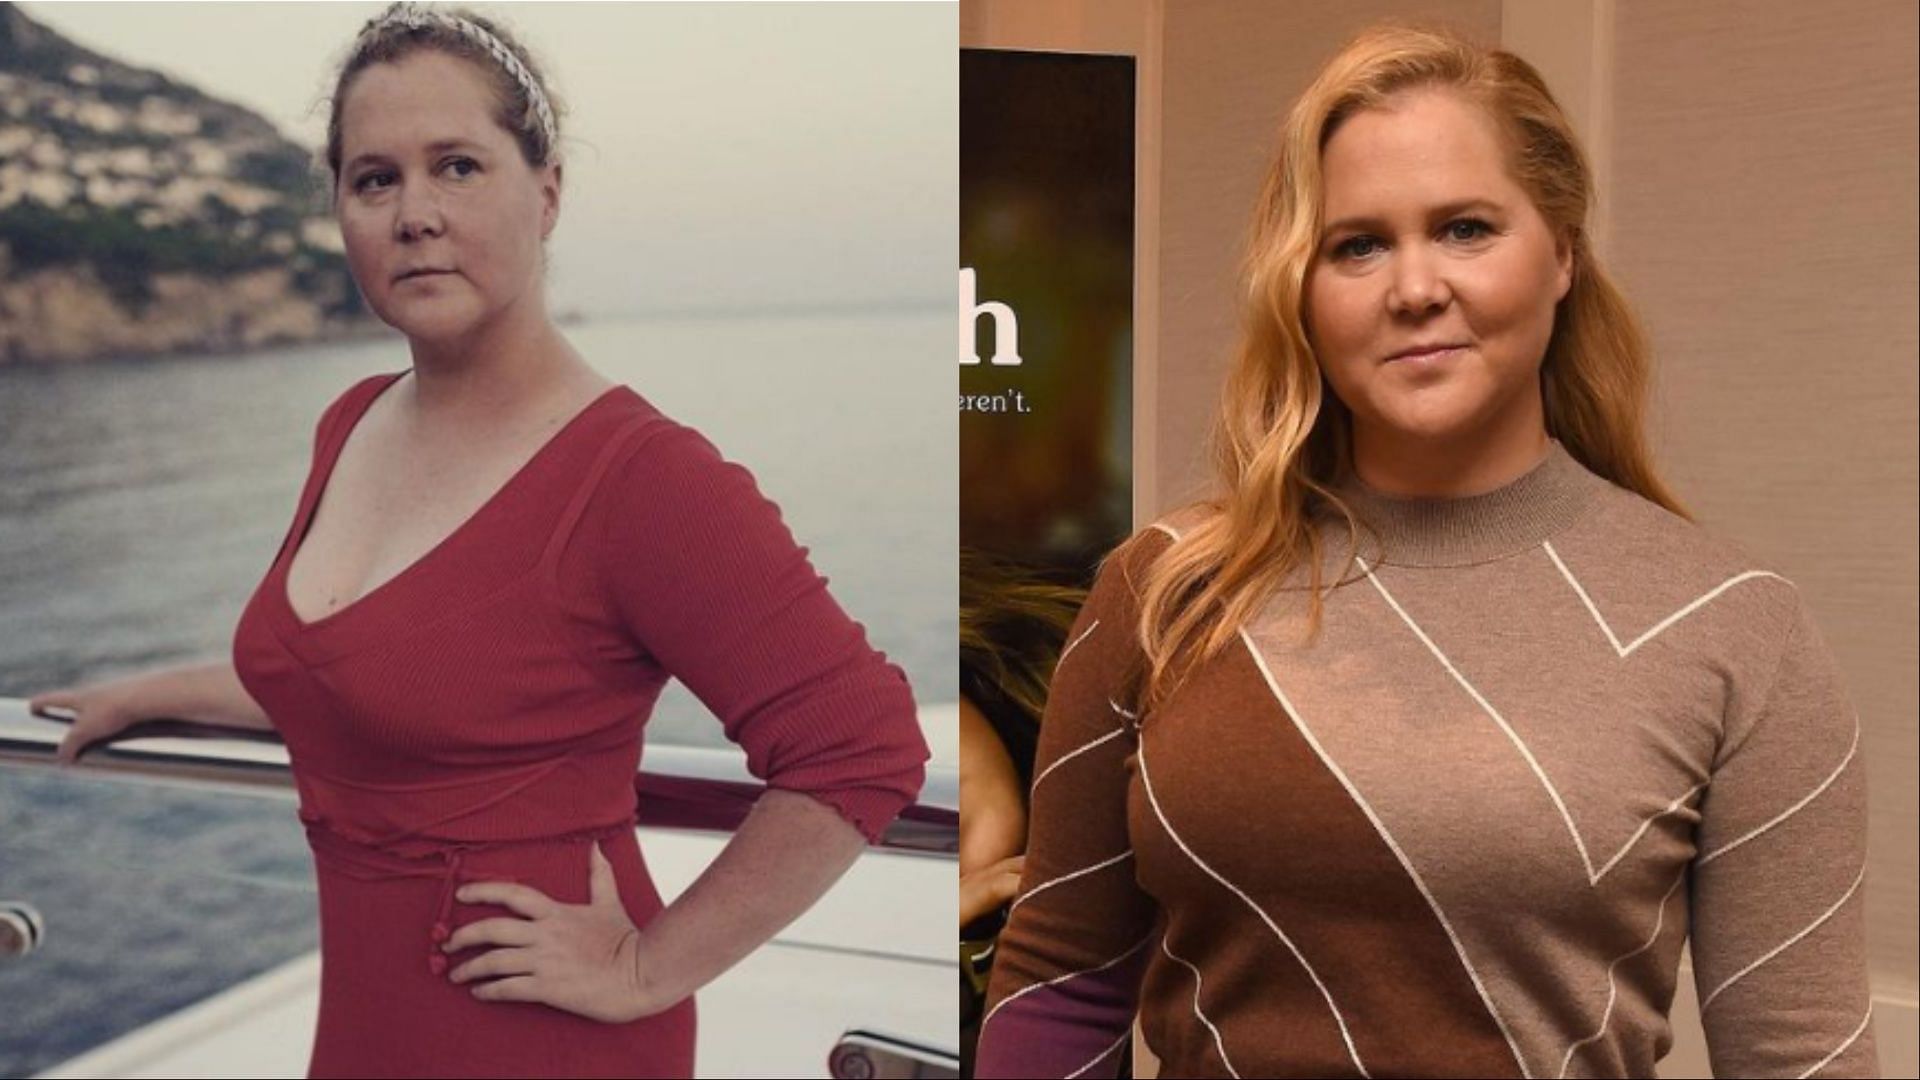 Amy Schumer shares exogenous Cushing syndrome diagnosis in recent interview (Image via amyschumer/Instagram)